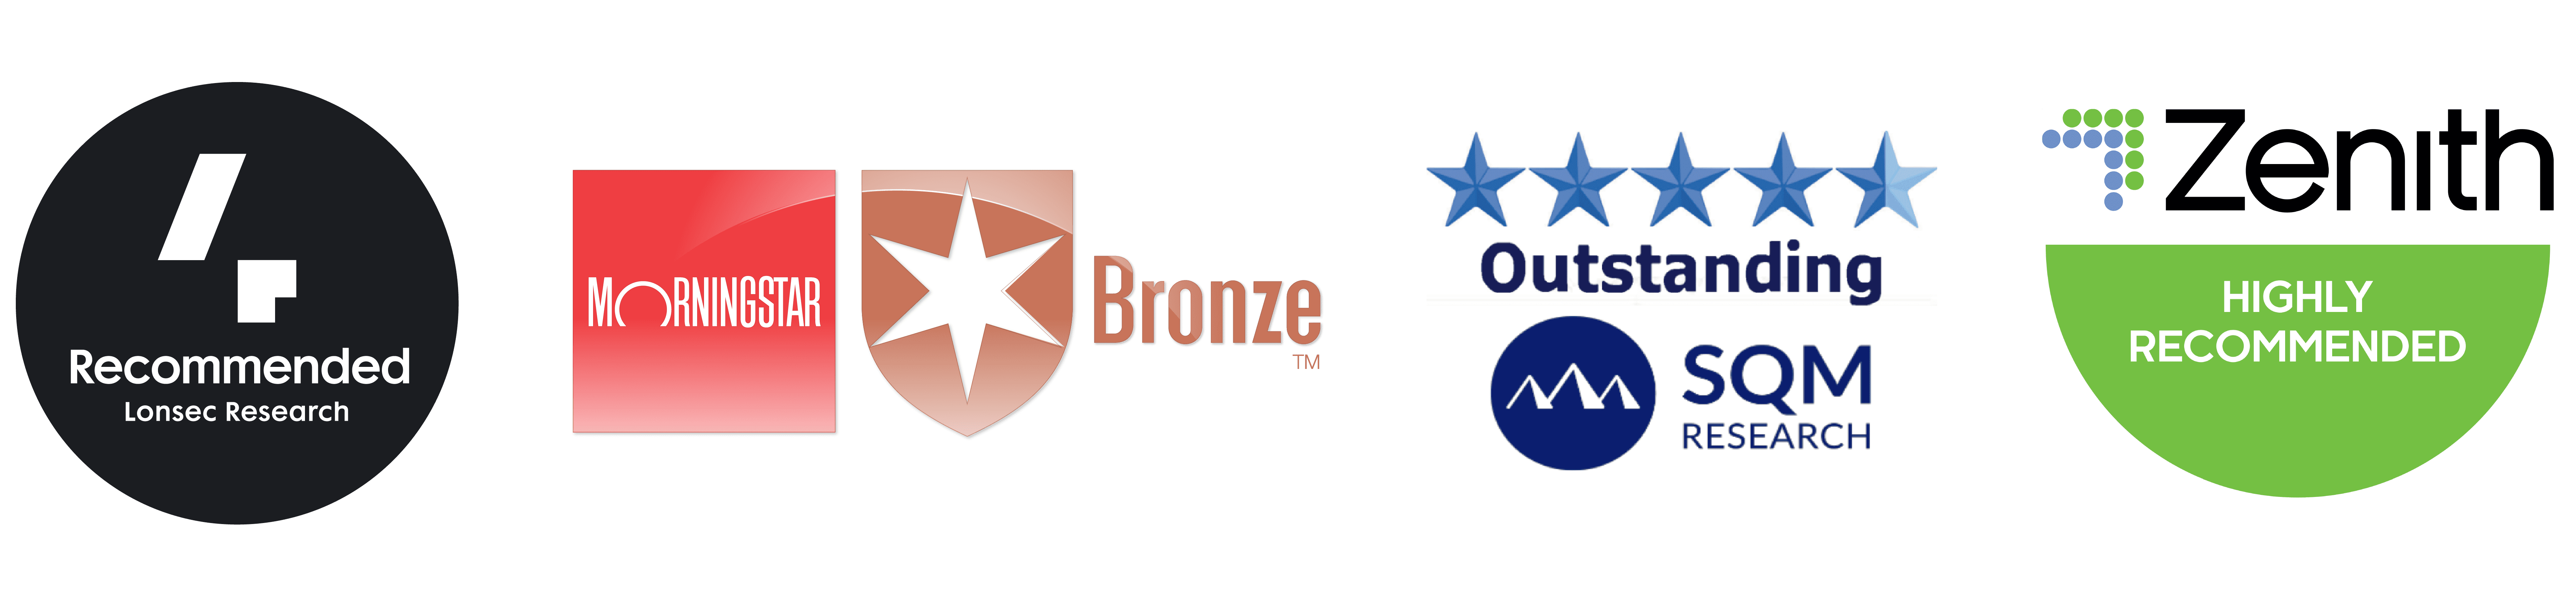 Lonsec recommended, Morningstar Bronze, SQM Outstanding, Zenith highly recommended ratings